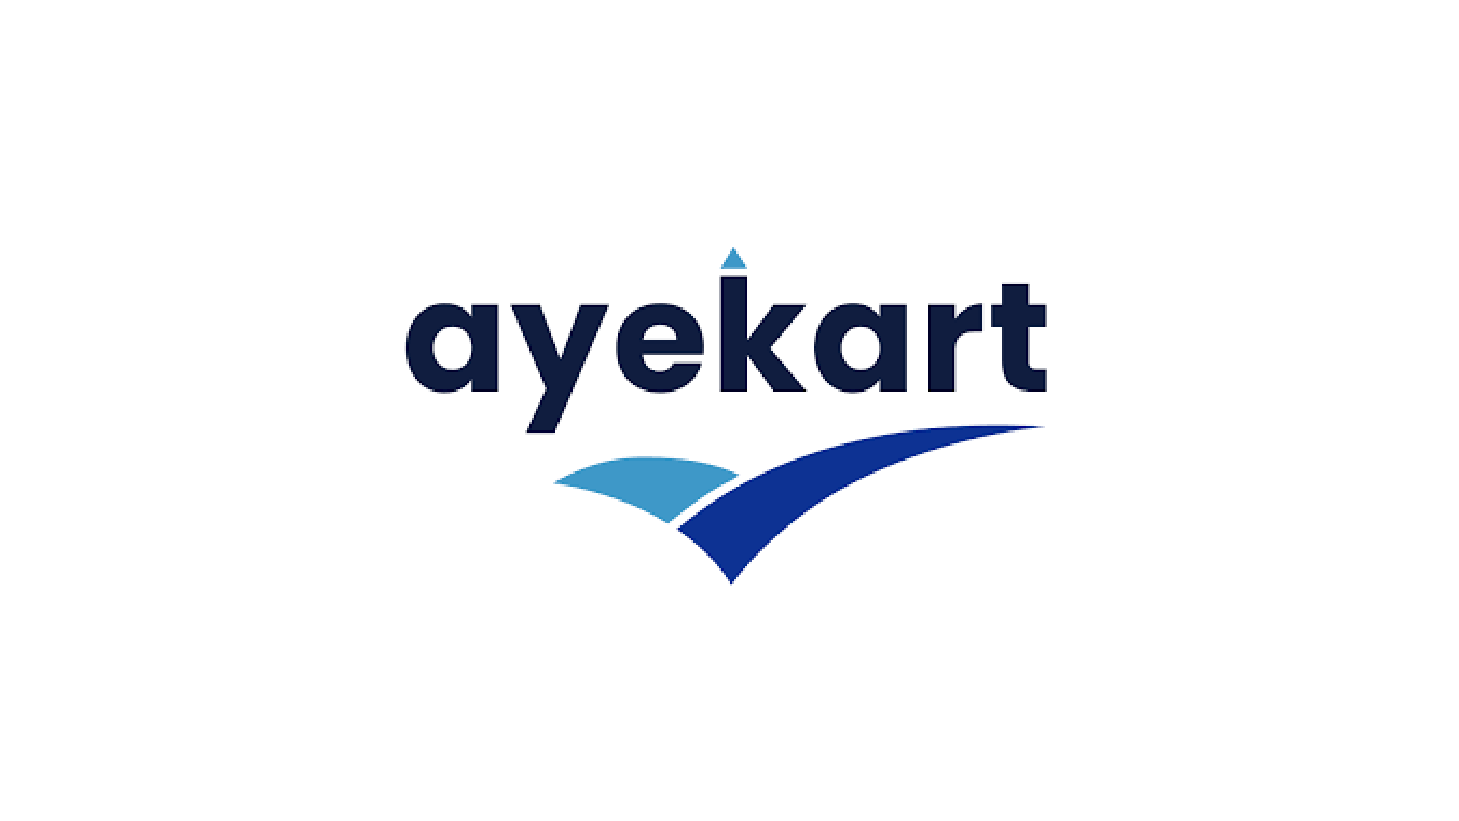 Fintech firm Ayekart used this deck to net $5.5m debt round - Tech in Asia